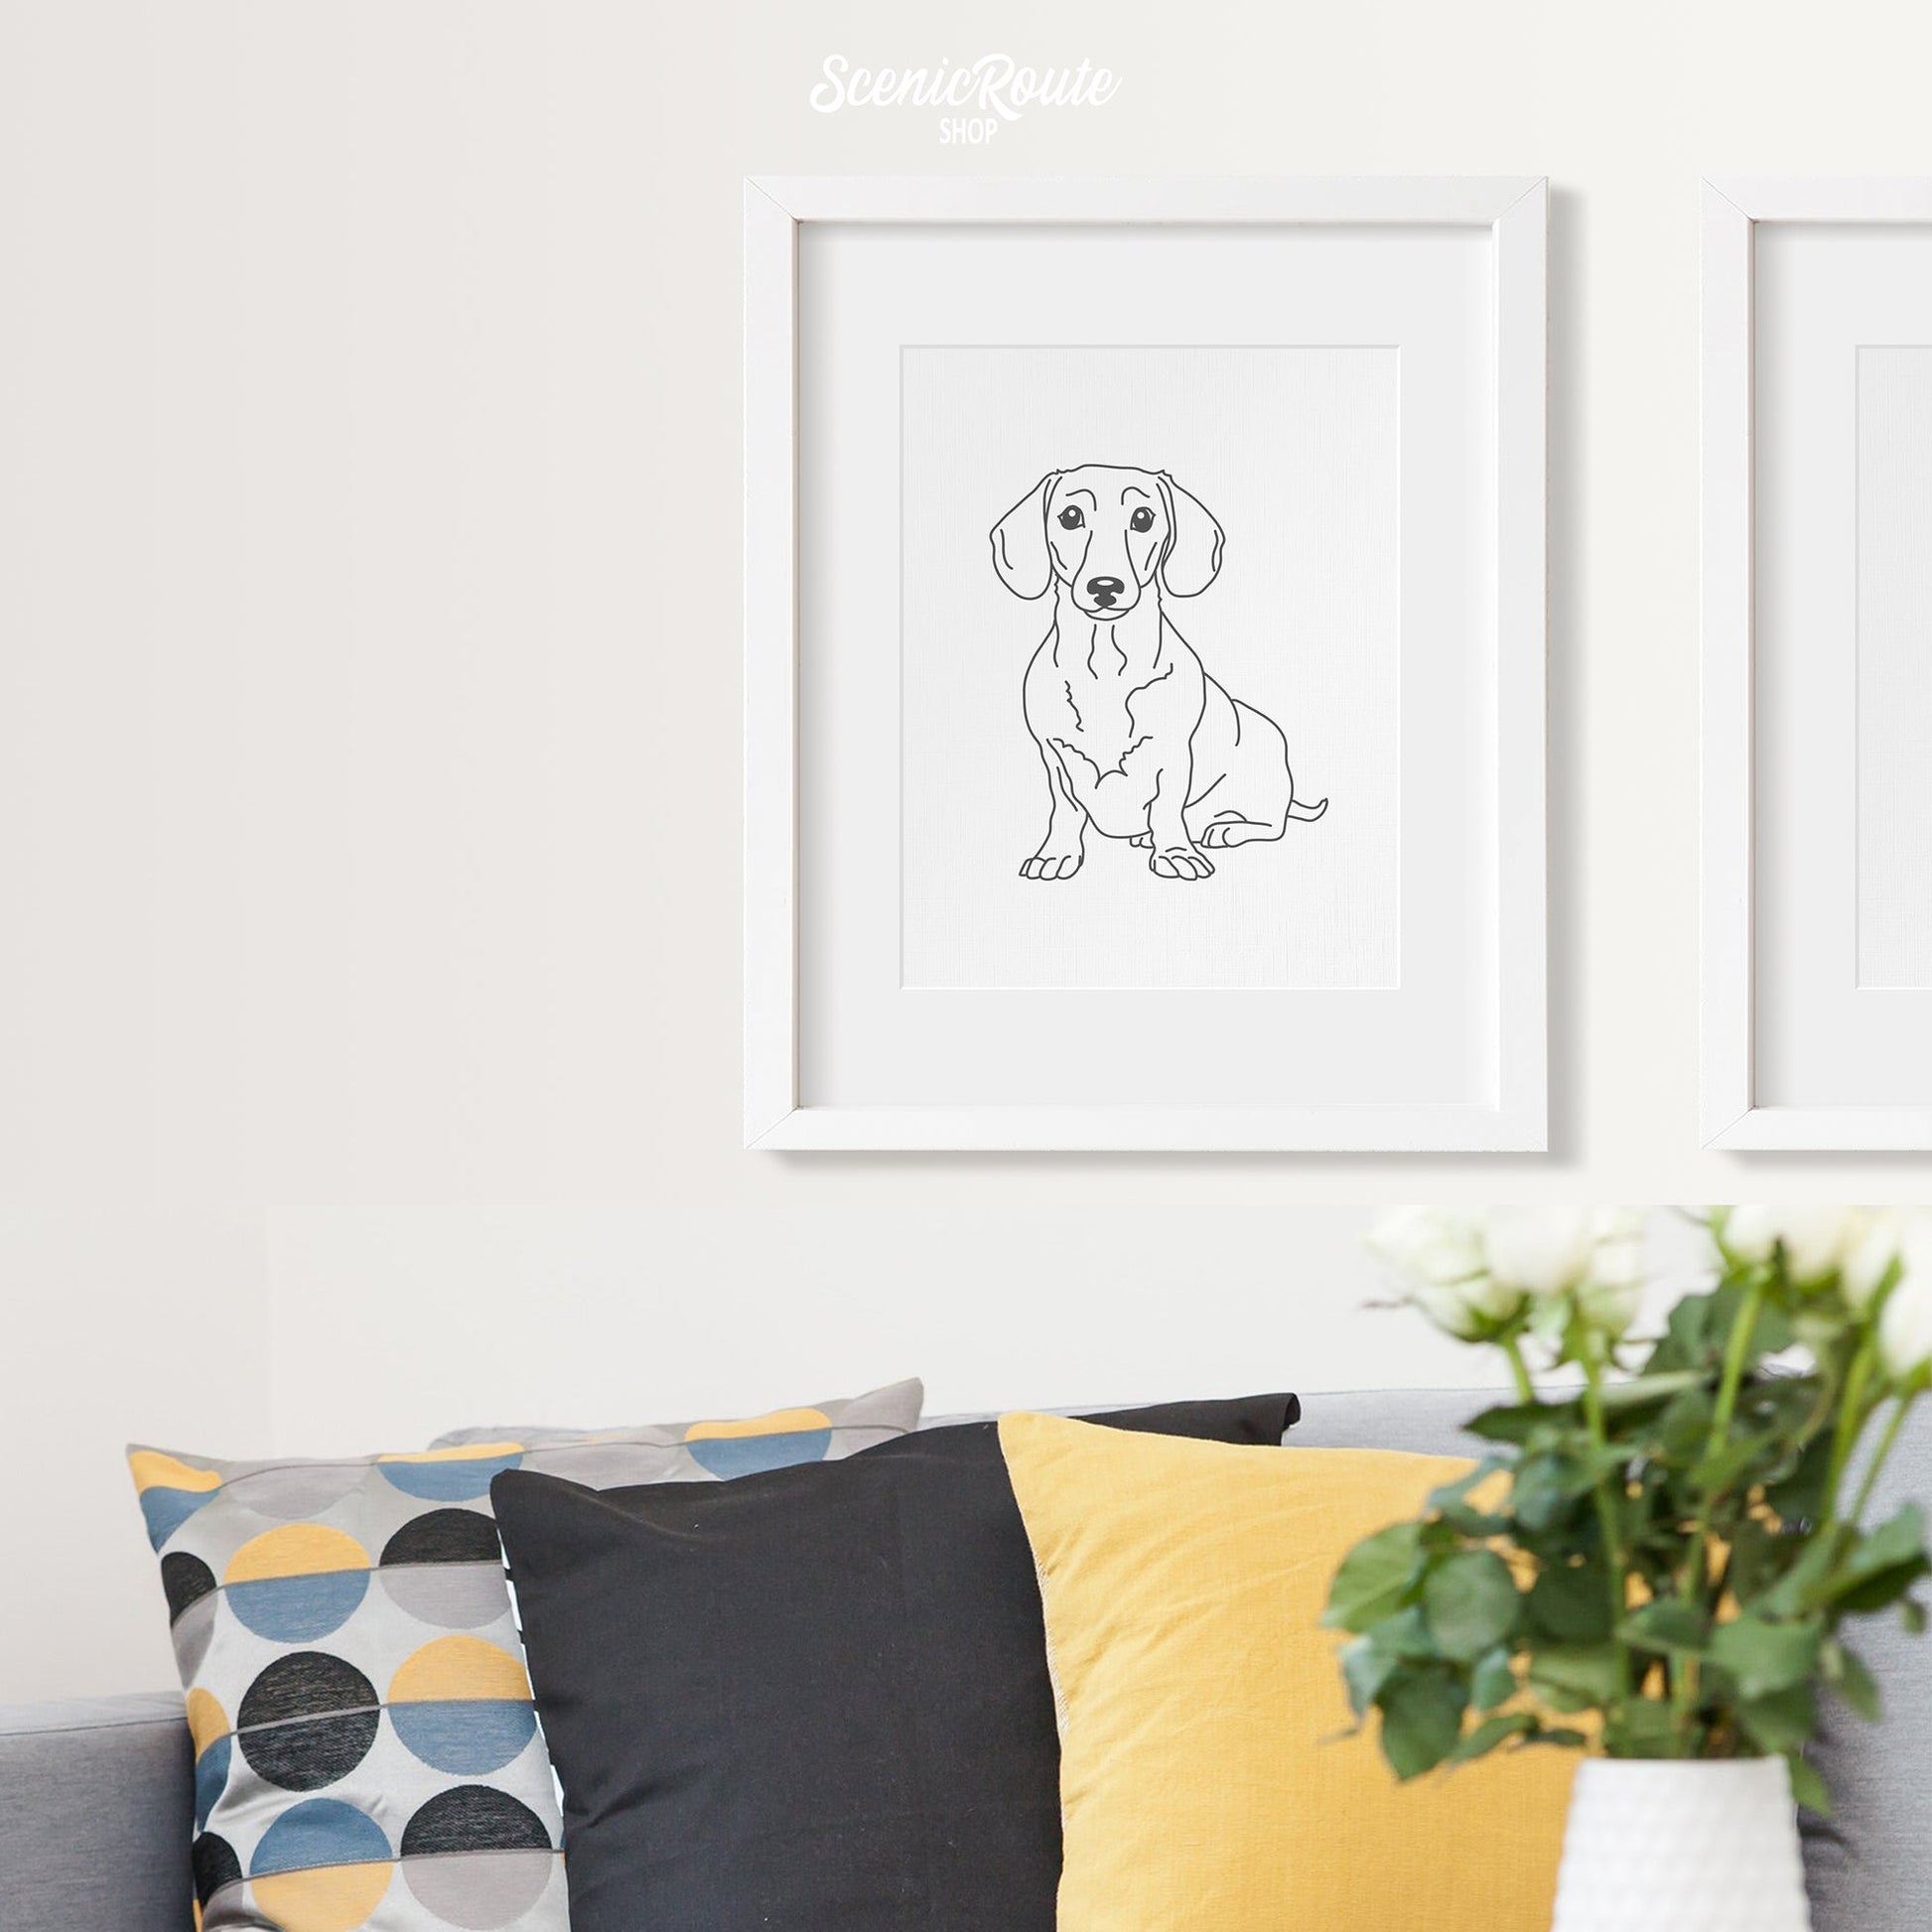 A framed line art drawing of a Dachshund dog on a white wall hanging above a couch with pillows